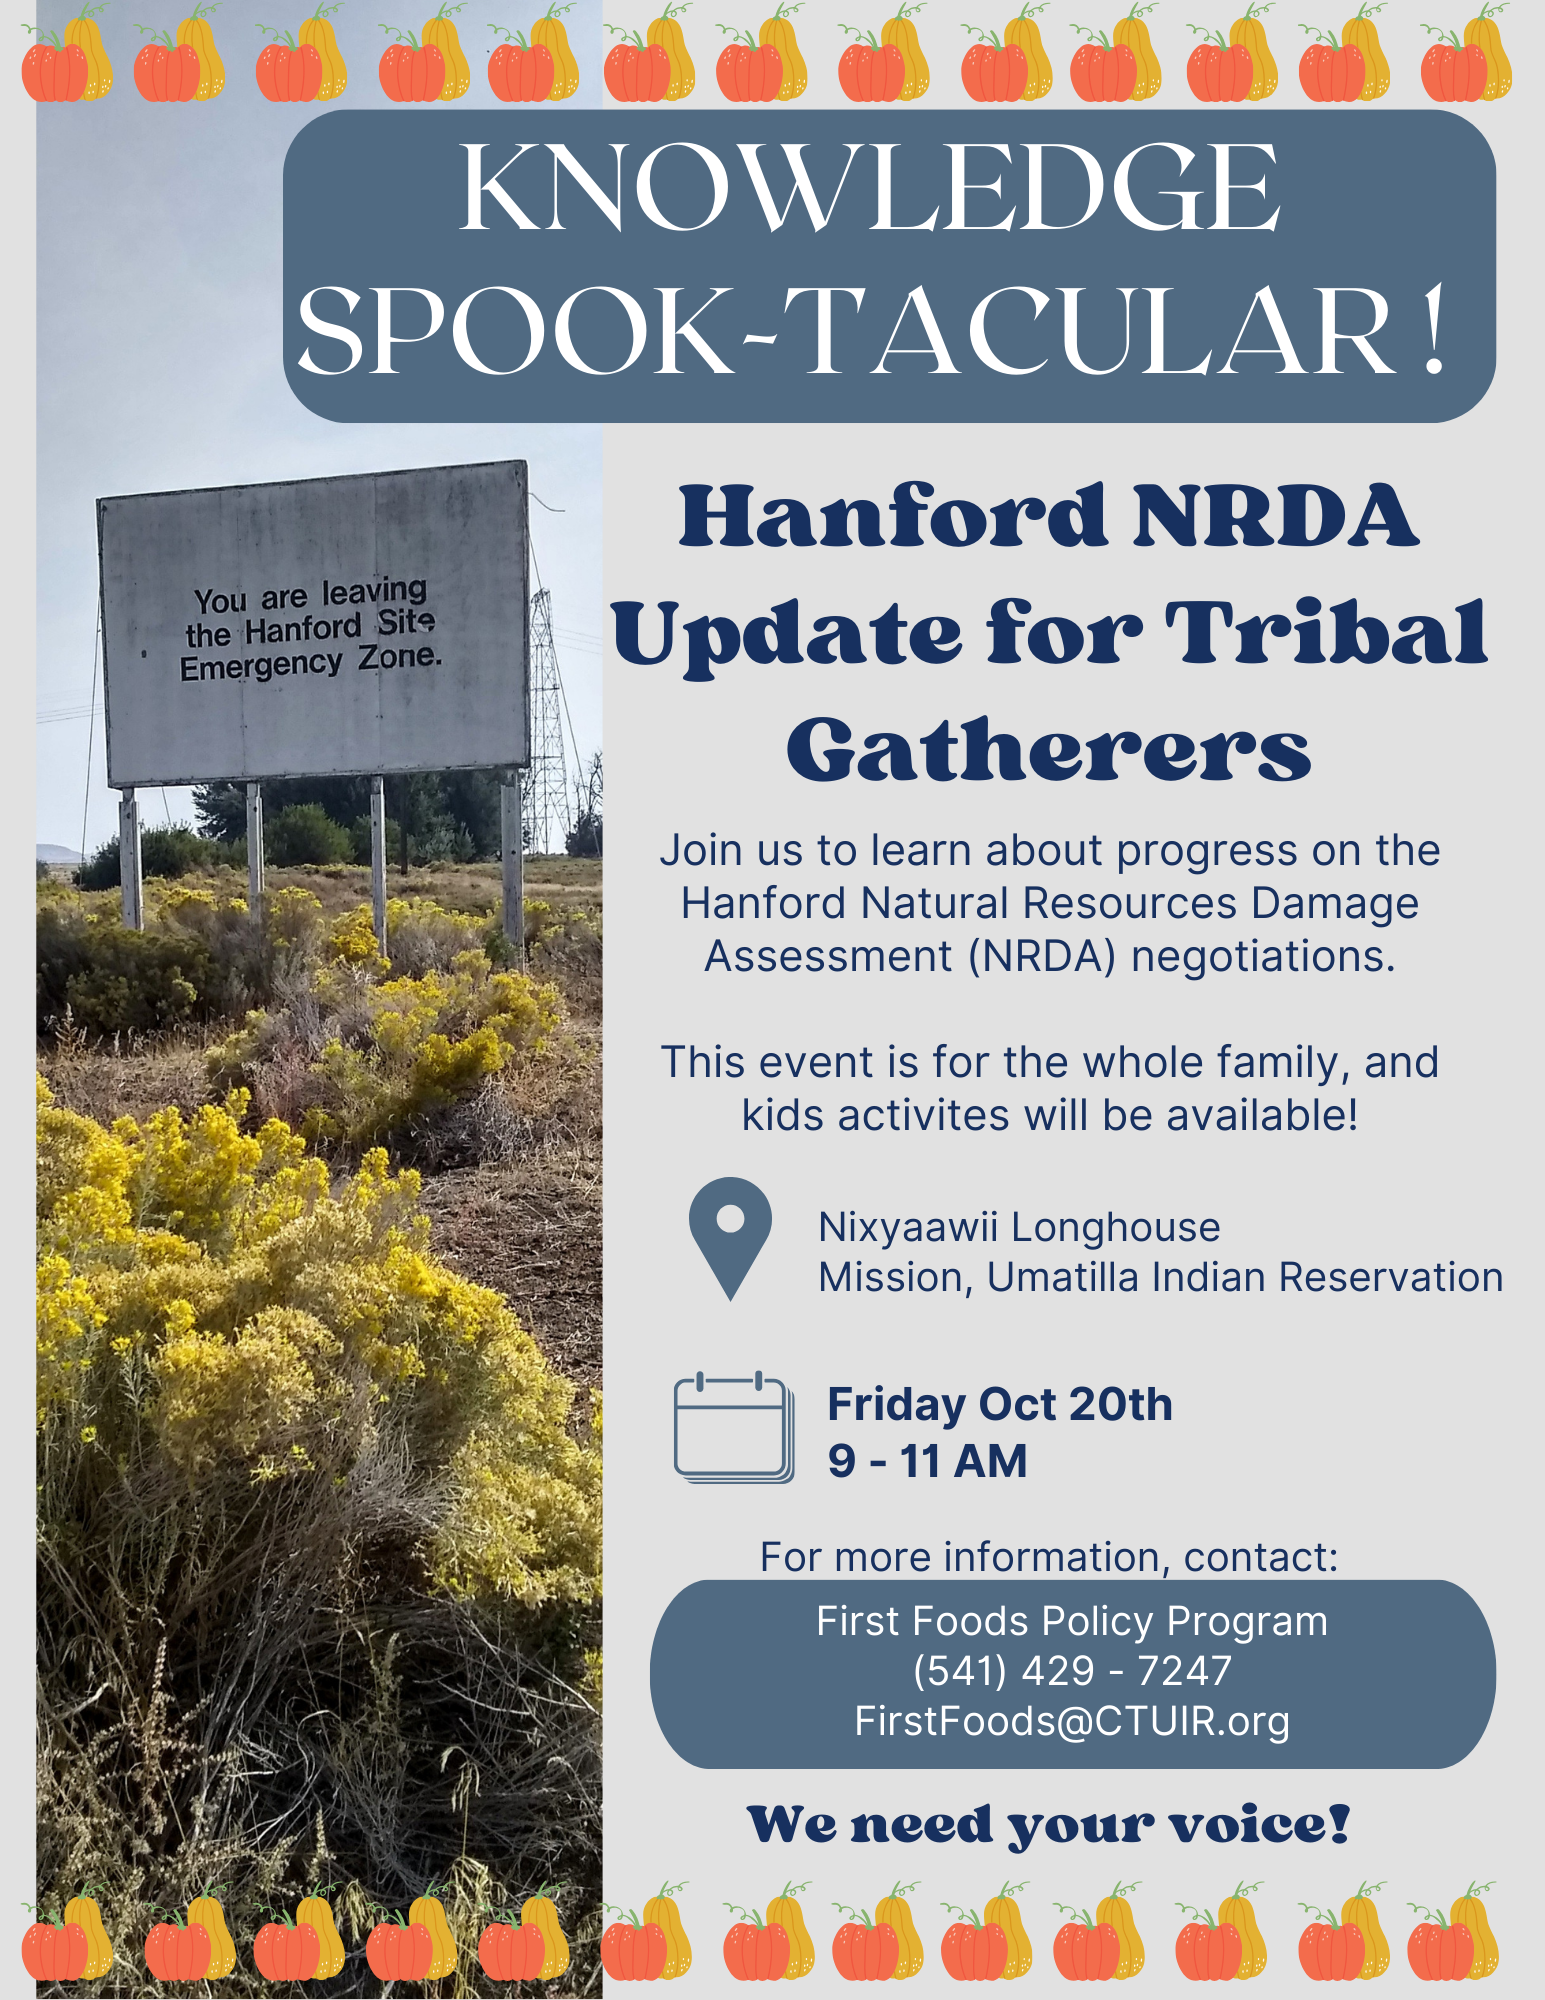 Promotional poster for an event; Knowledge Spooktacular Hanford Natural Resource Damage Assessment Update for Tribal Gatherers on Friday Oct 20th 2023 9 to 11 AM at the Mission Longhouse